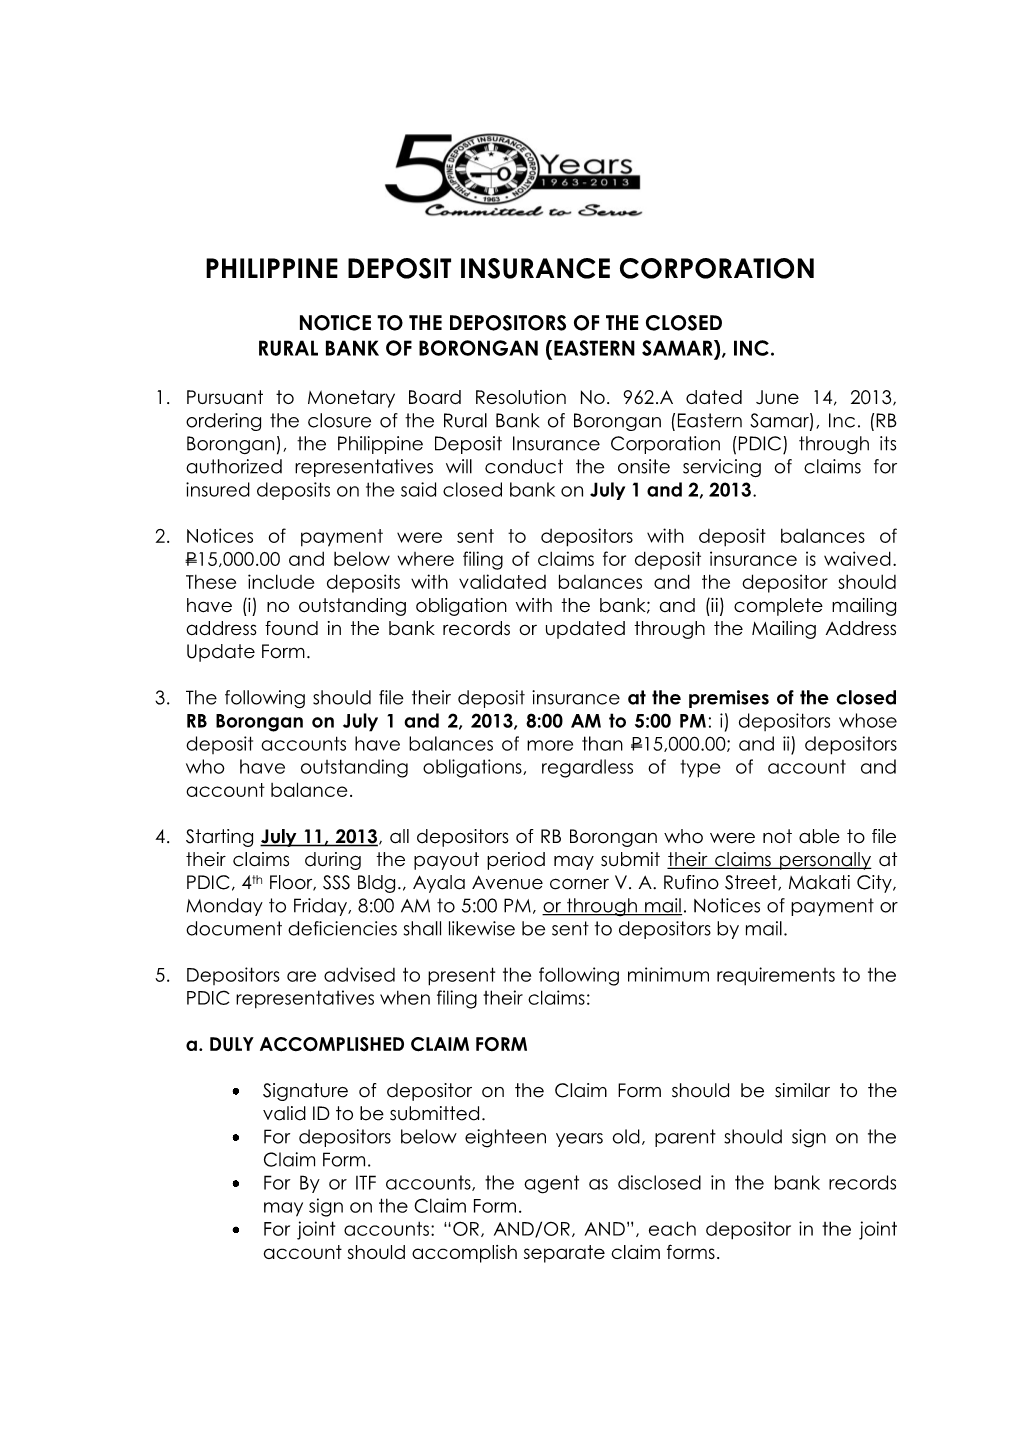 Notice to the Depositors of the Closed Rural Bank of Borongan (Eastern Samar), Inc